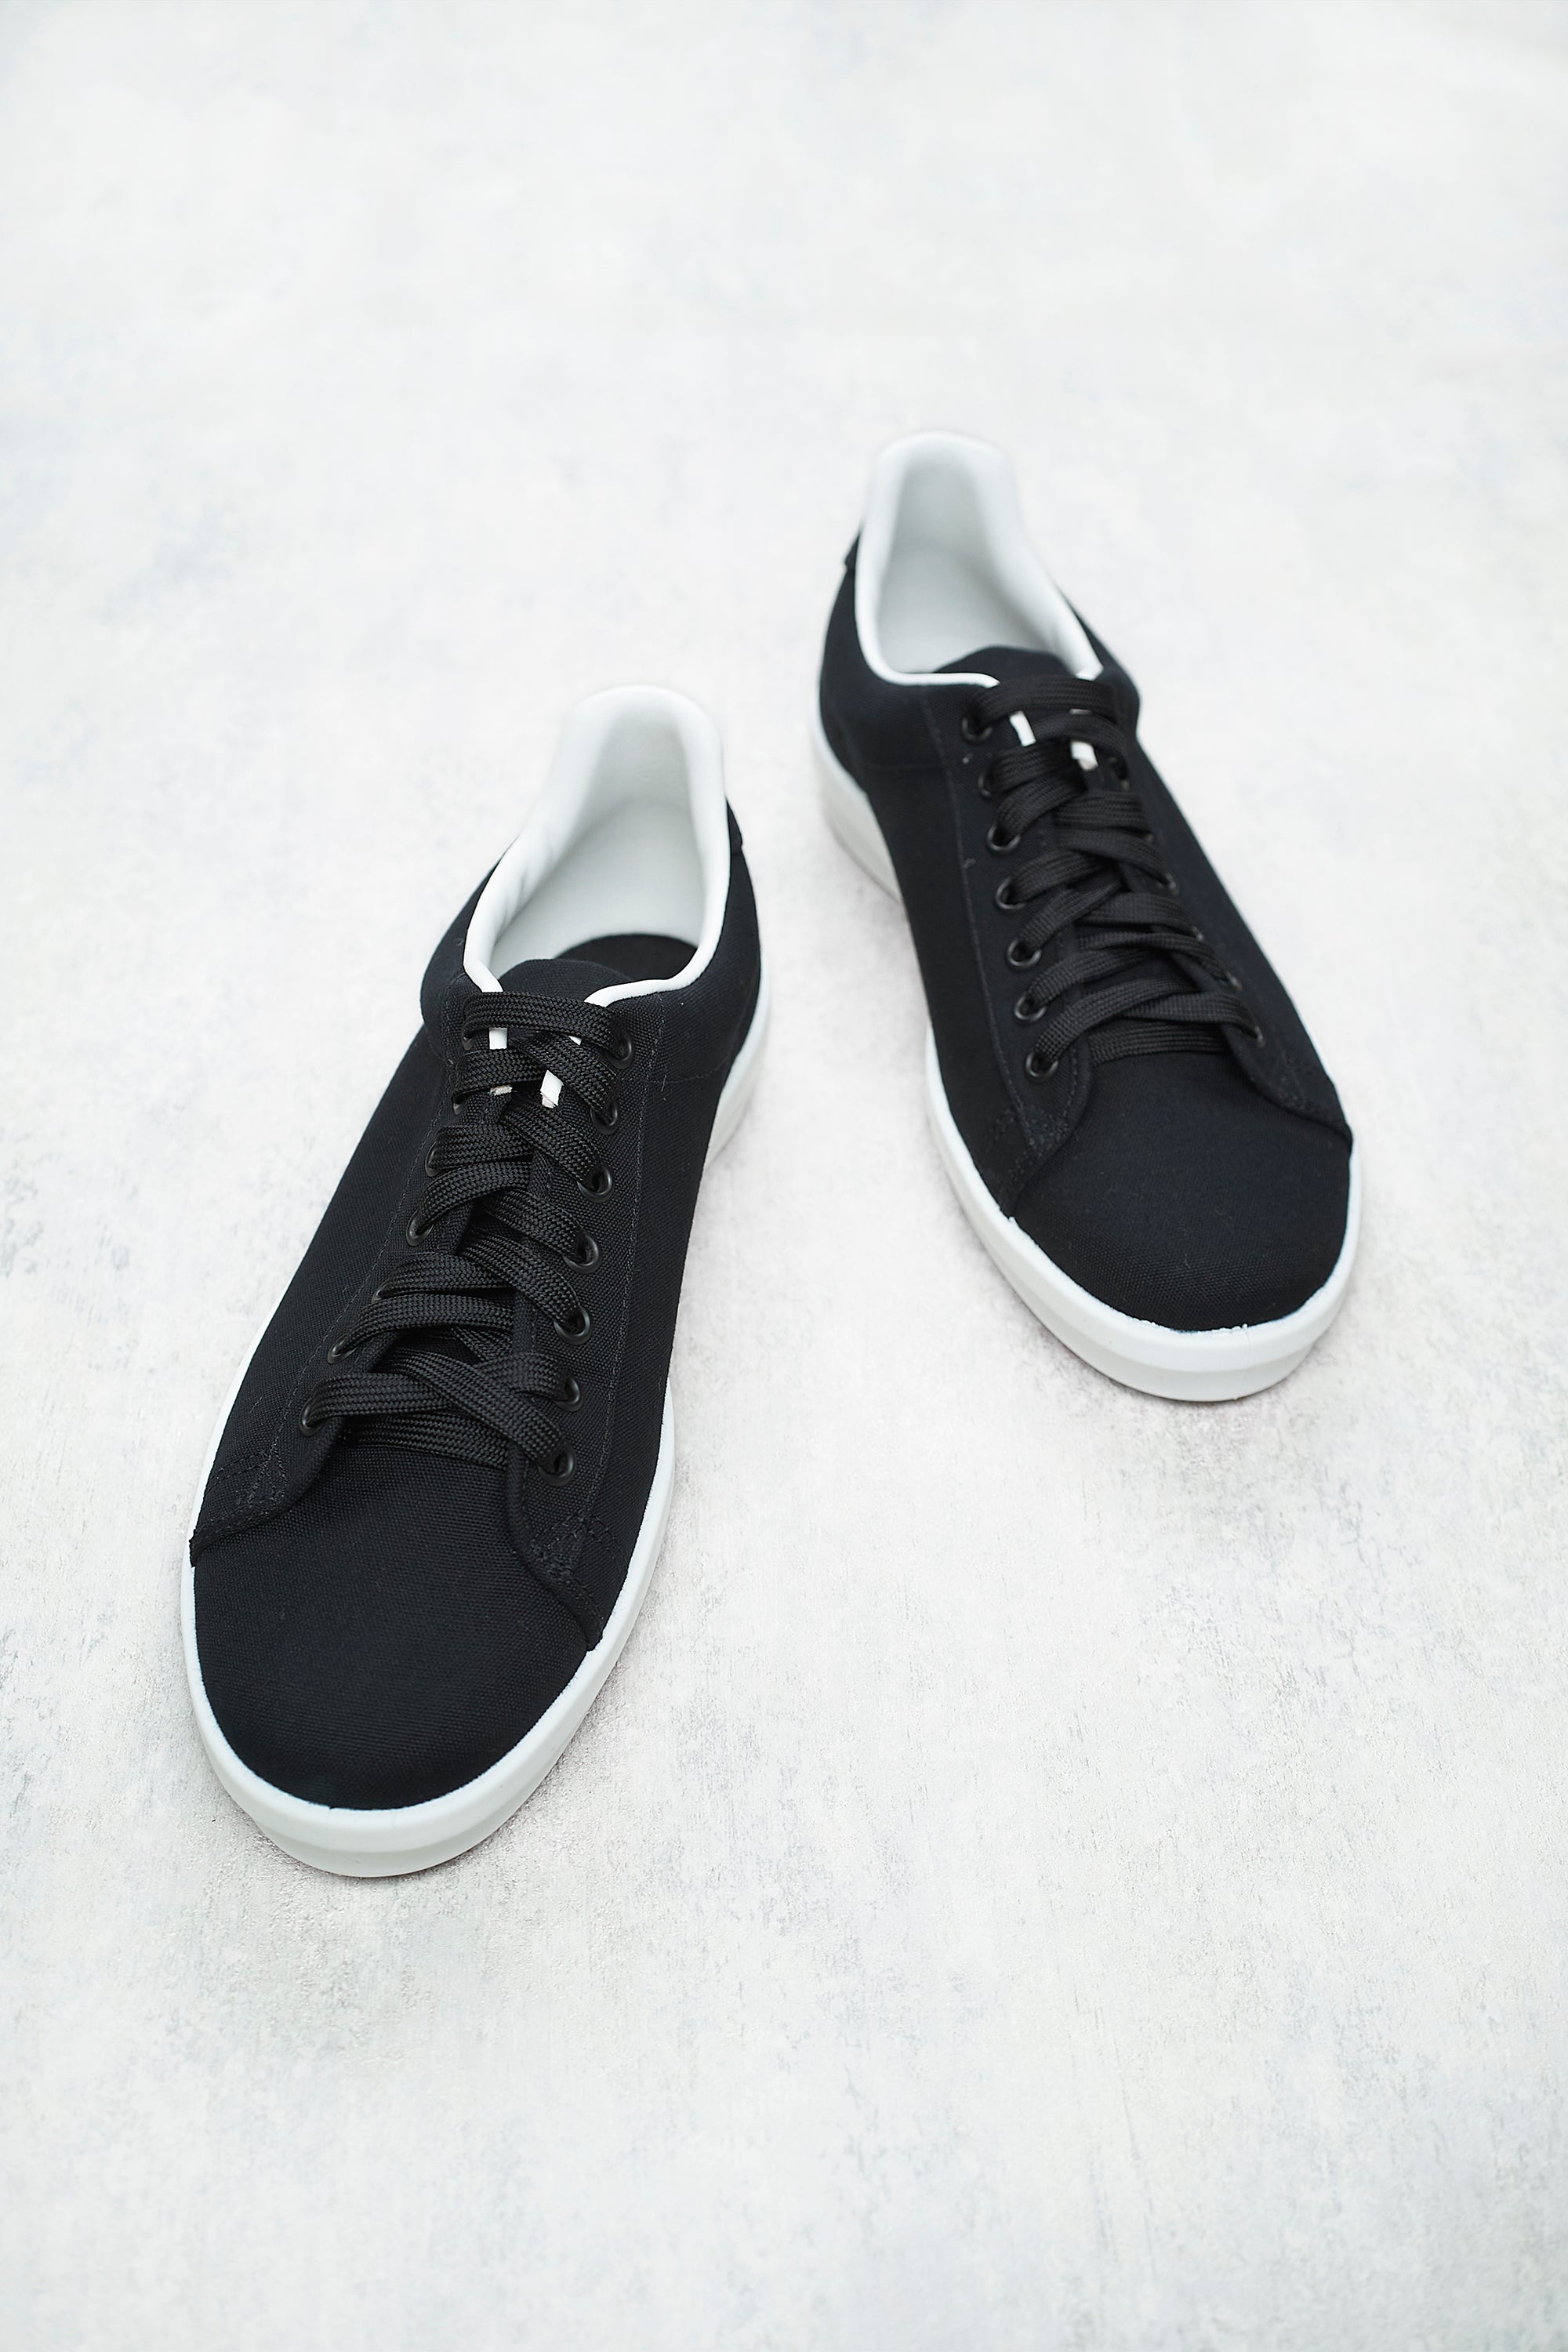 Moonstar Raly Vul Black Canvas Shoes